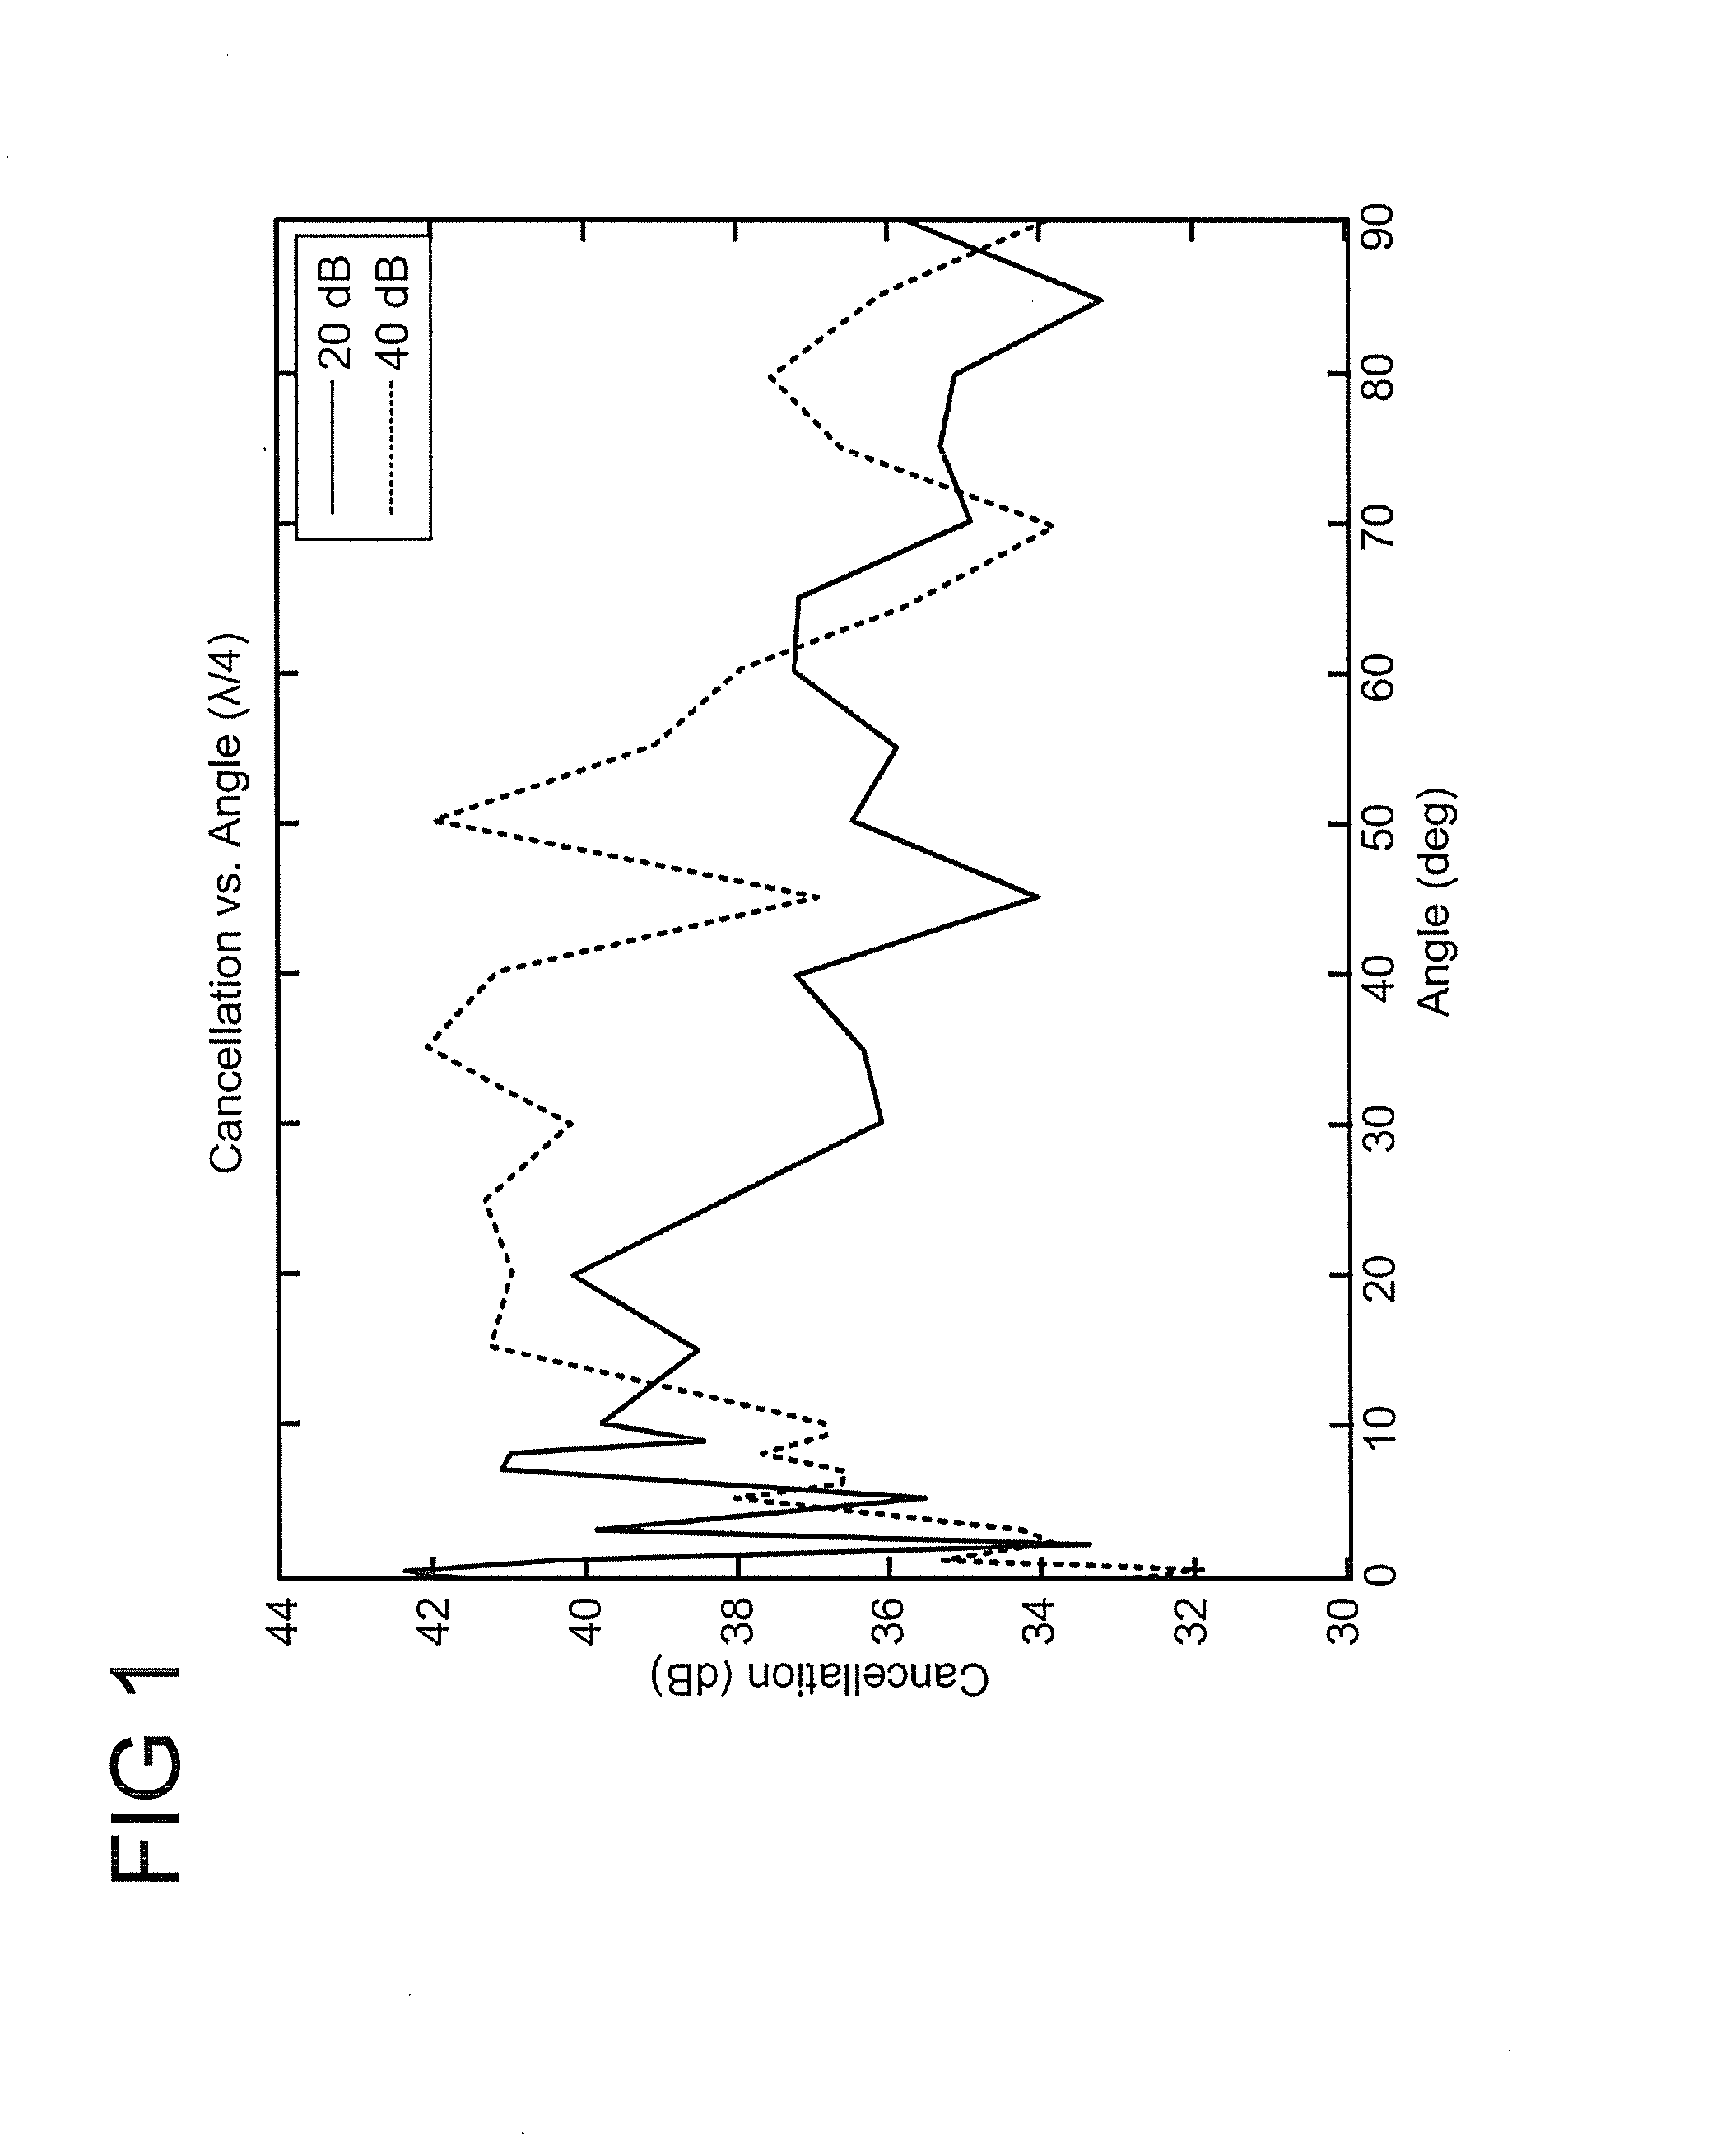 Methods, systems, and computer readable media for mitigation of in-band interference of global positioning system (GPS) signals